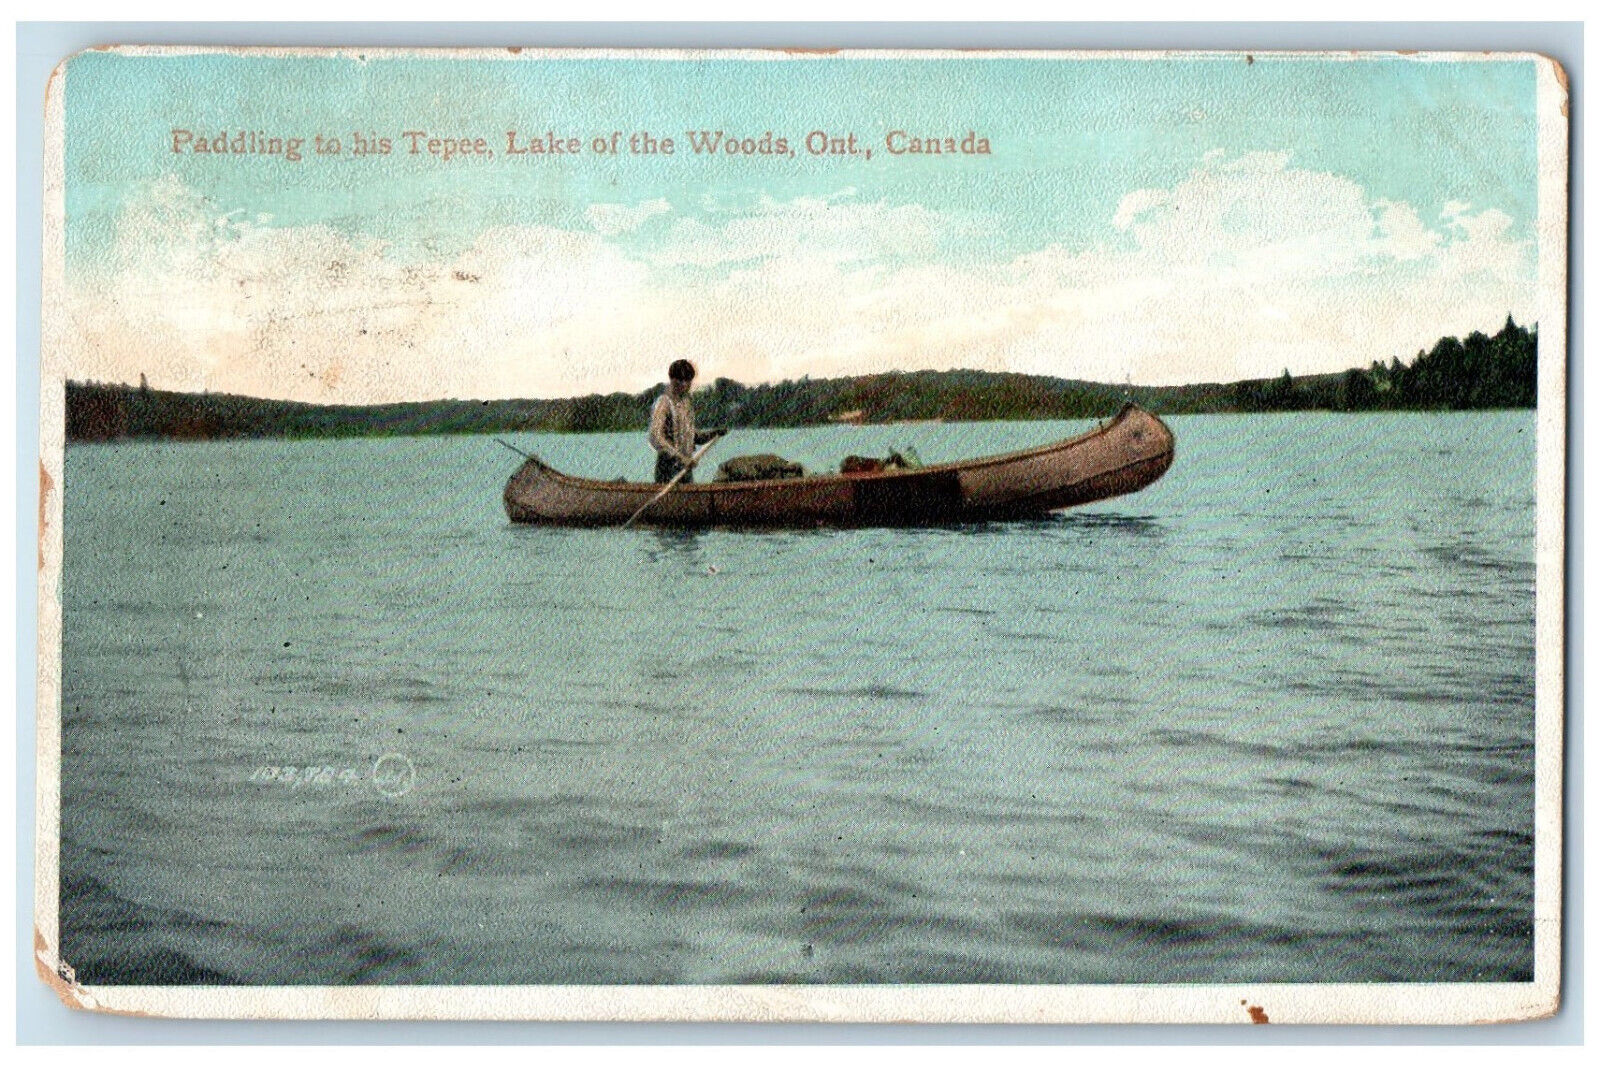 1903 Padding To His Tepee Lake of the Woods Ontario Canada Posted Postcard